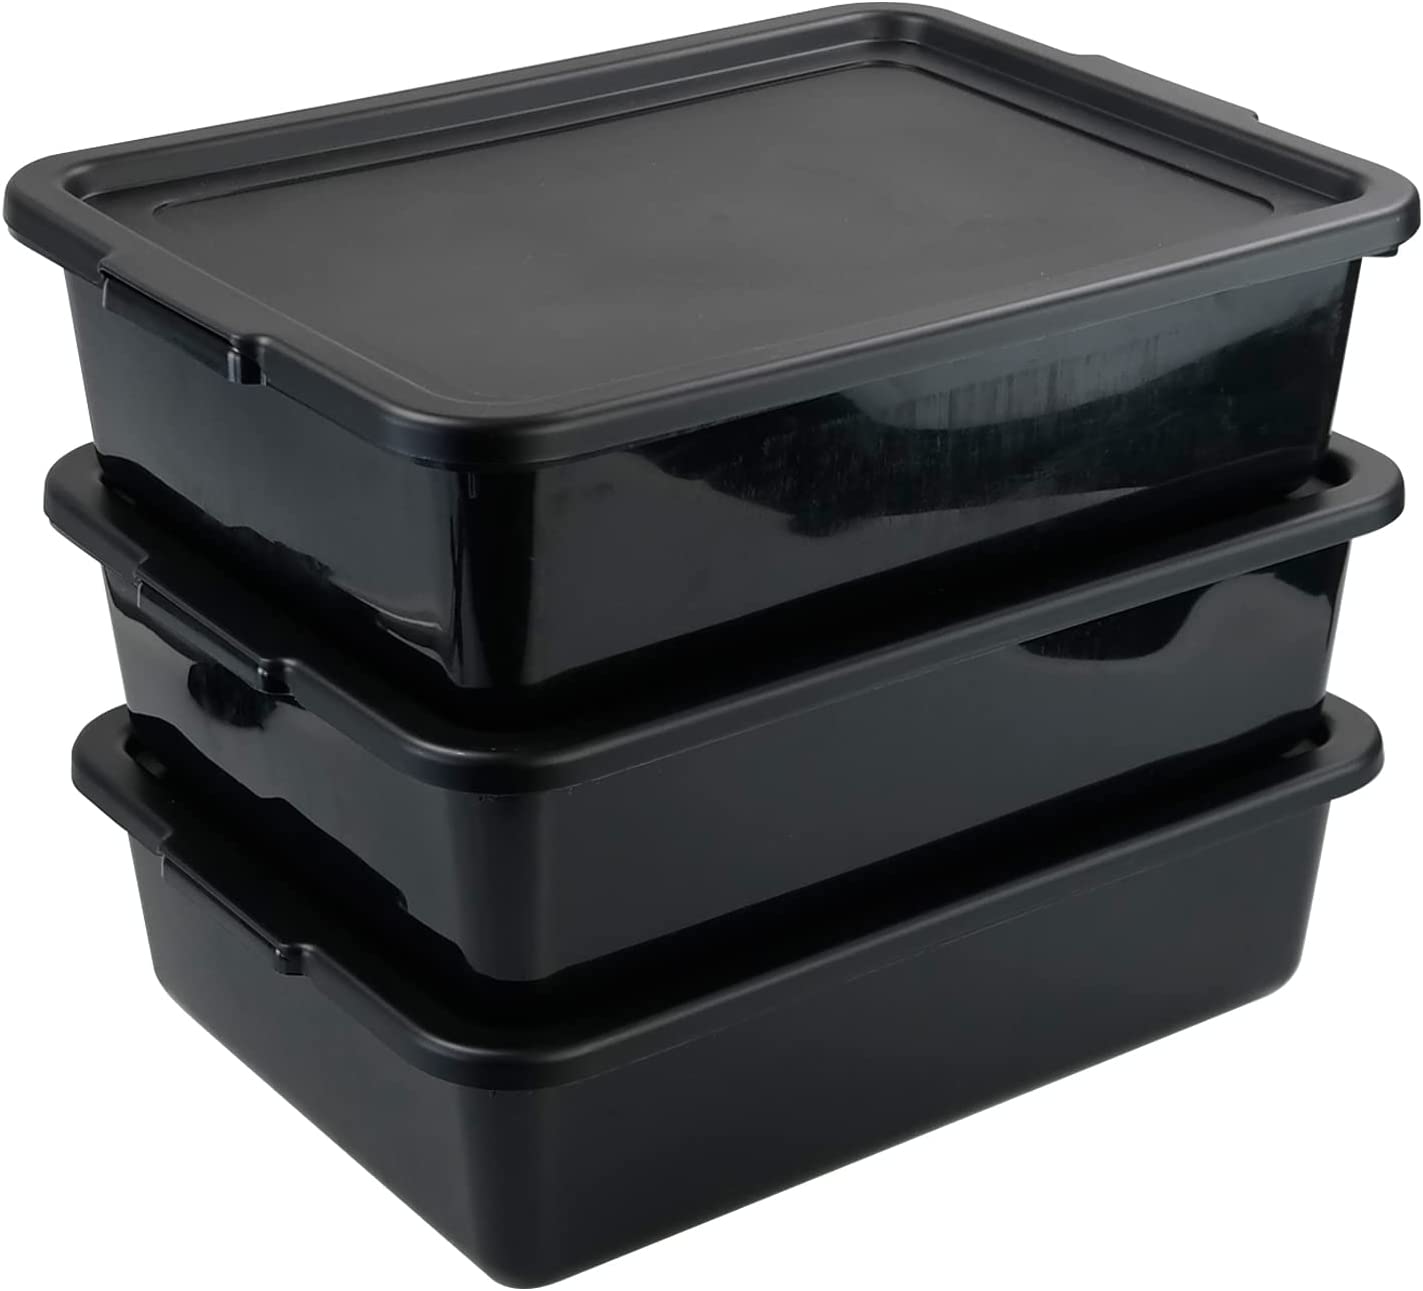 Hommp 3-Pack Commercial Bus Box, 13 L Black Plastic Bus Tub with Lid